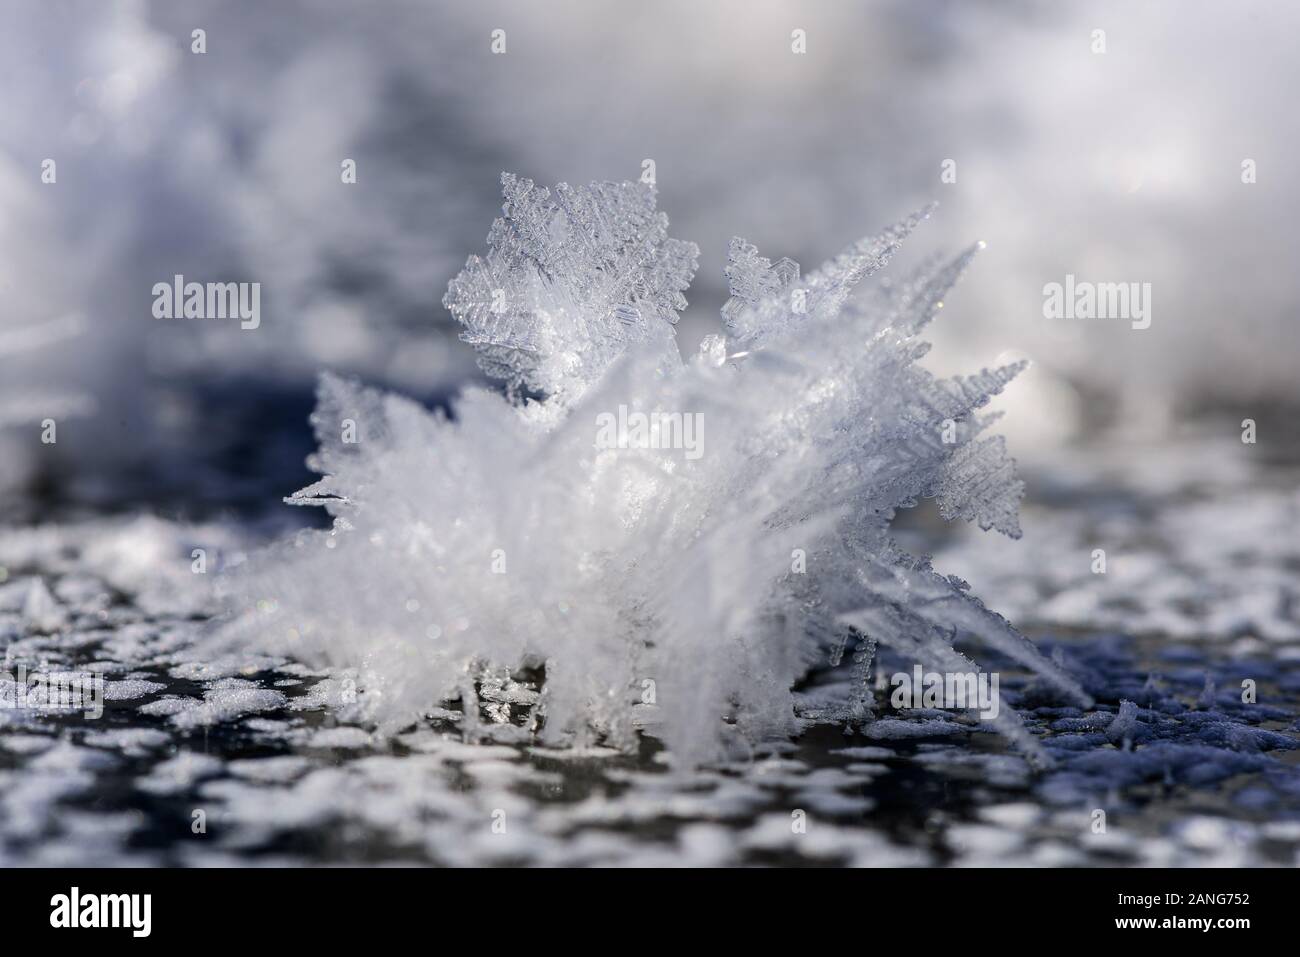 Real frozen ice crystals in blue, winter background. Closeup of ice crystals frozen in winter. Stock Photo